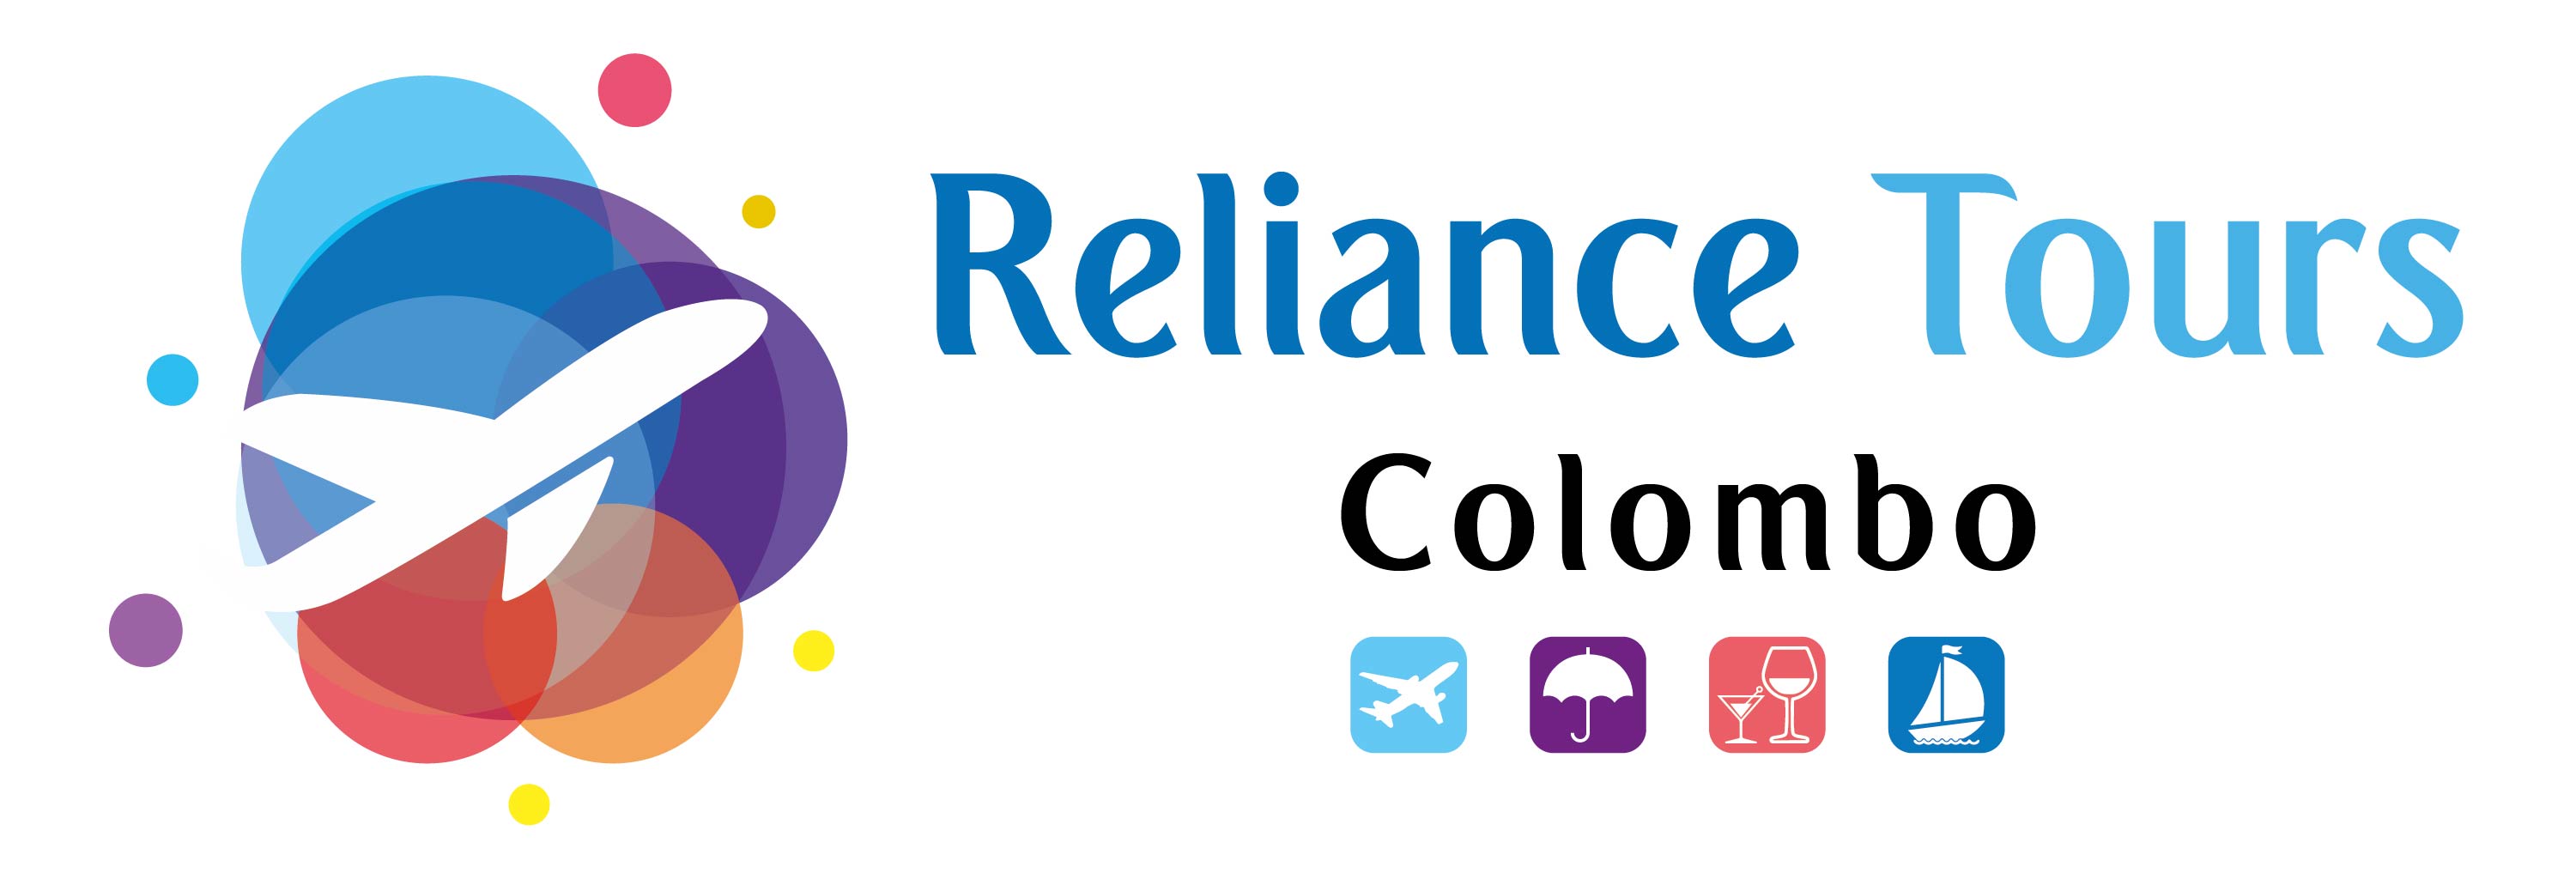 Reliance Tours Colombo